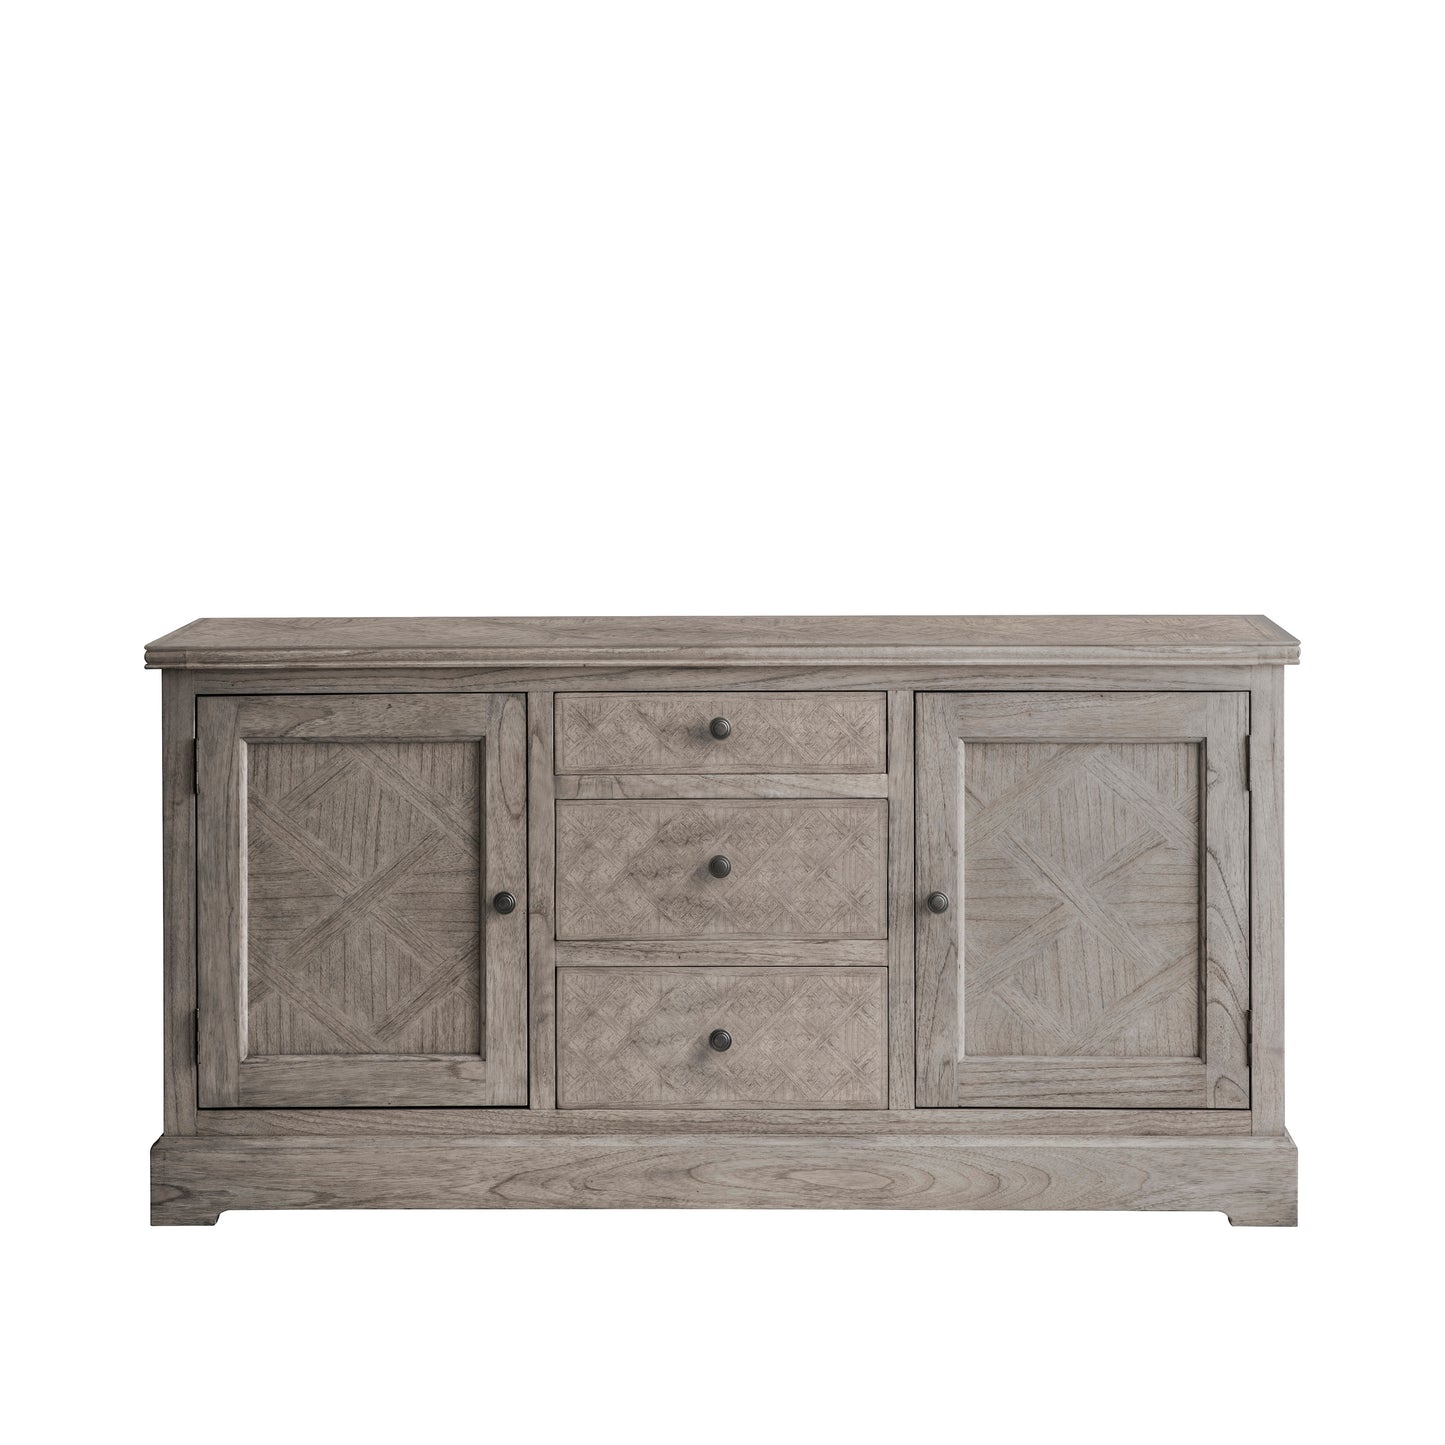 A Belsford 2 Door 3 Drawer Sideboard from Kikiathome.co.uk, offering home furniture with drawers and doors for interior decor.